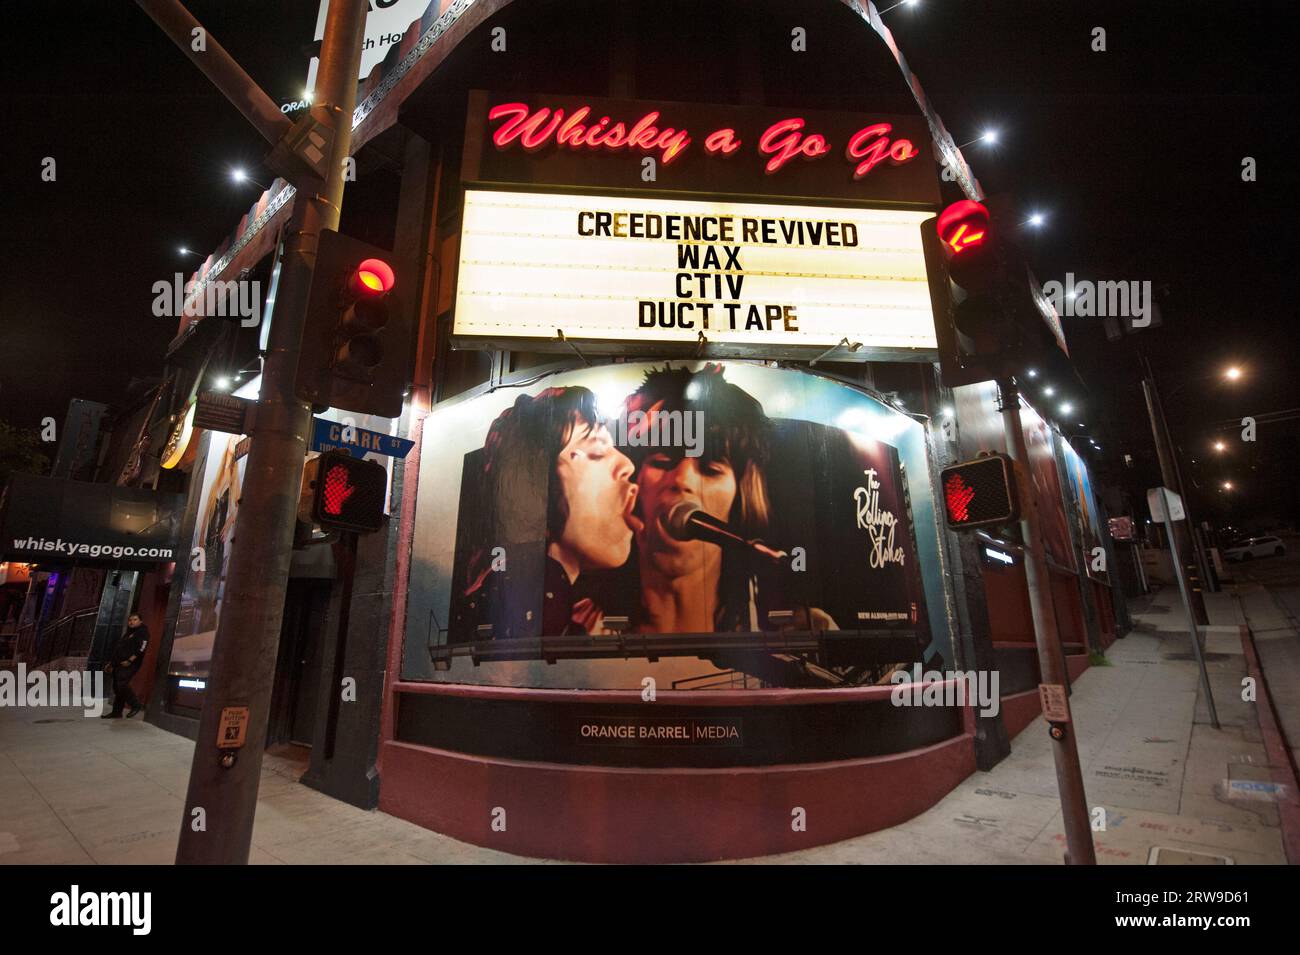 Rolling Stones billboards from the Angry video on the Whisky A Go Go, on the Sunset Strip, West Hollywood, Los Angeles, California, USA Stock Photo